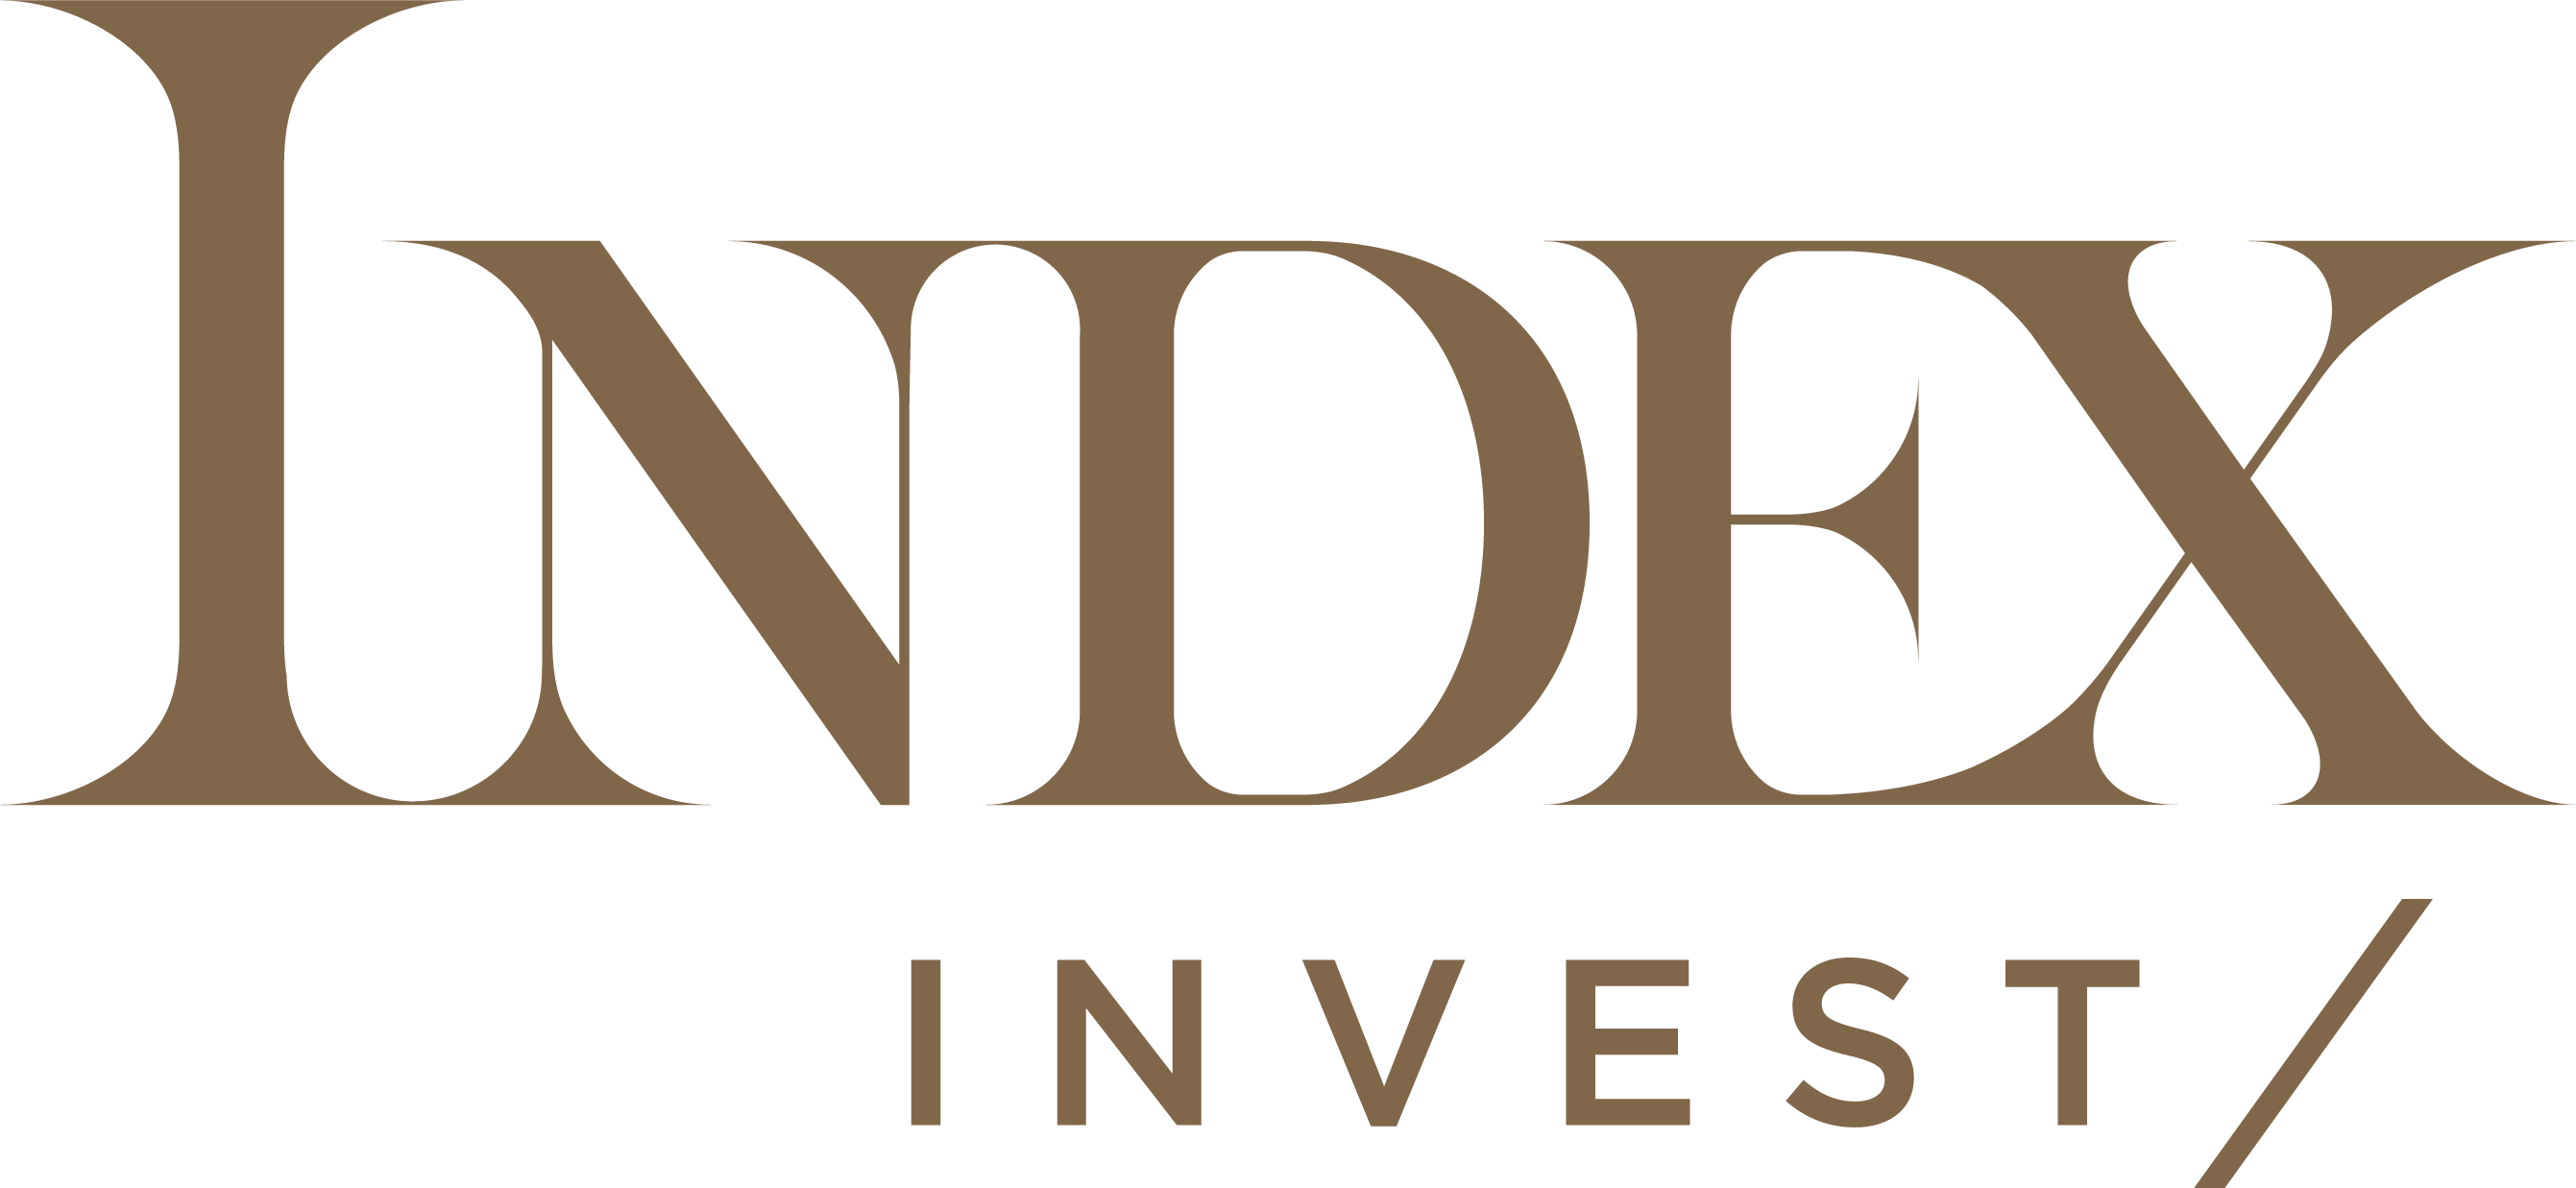 Index Investment Group